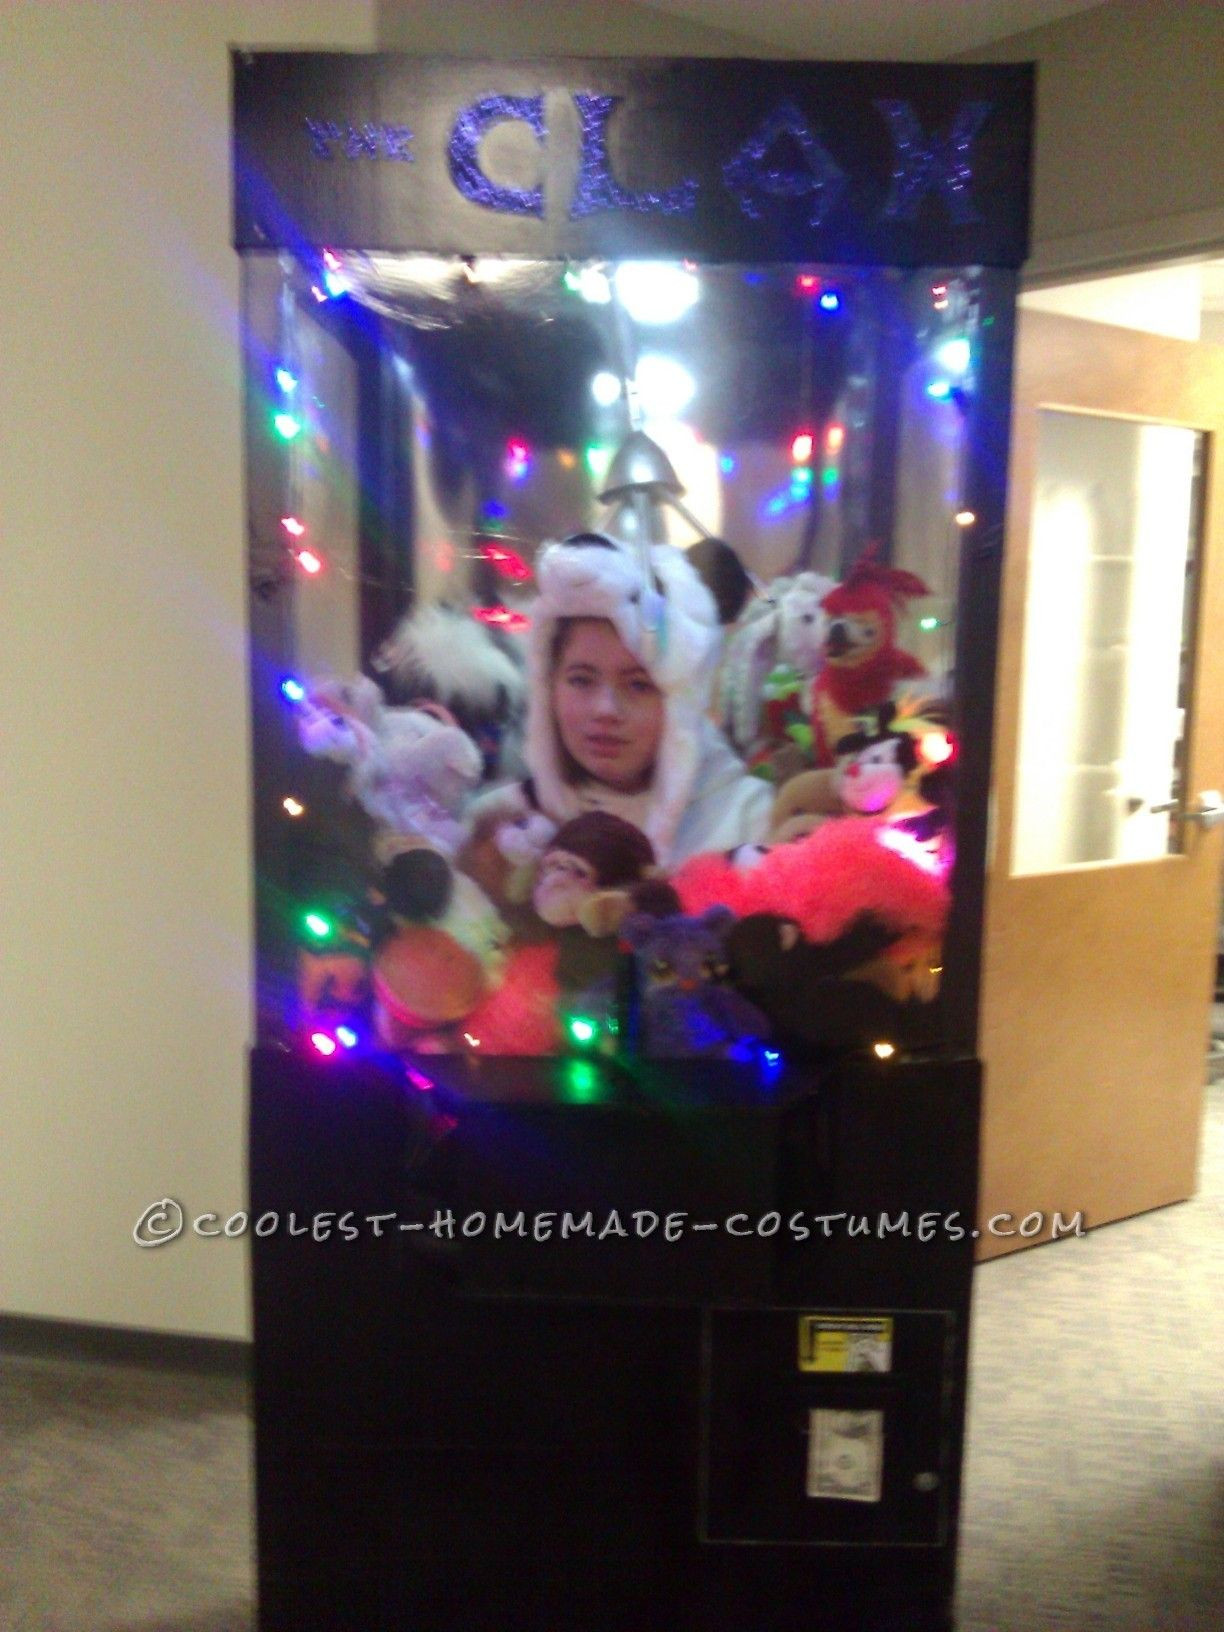 Cool DIY Halloween Costumes
 Awesome Homemade Costume Idea The Claw Machine